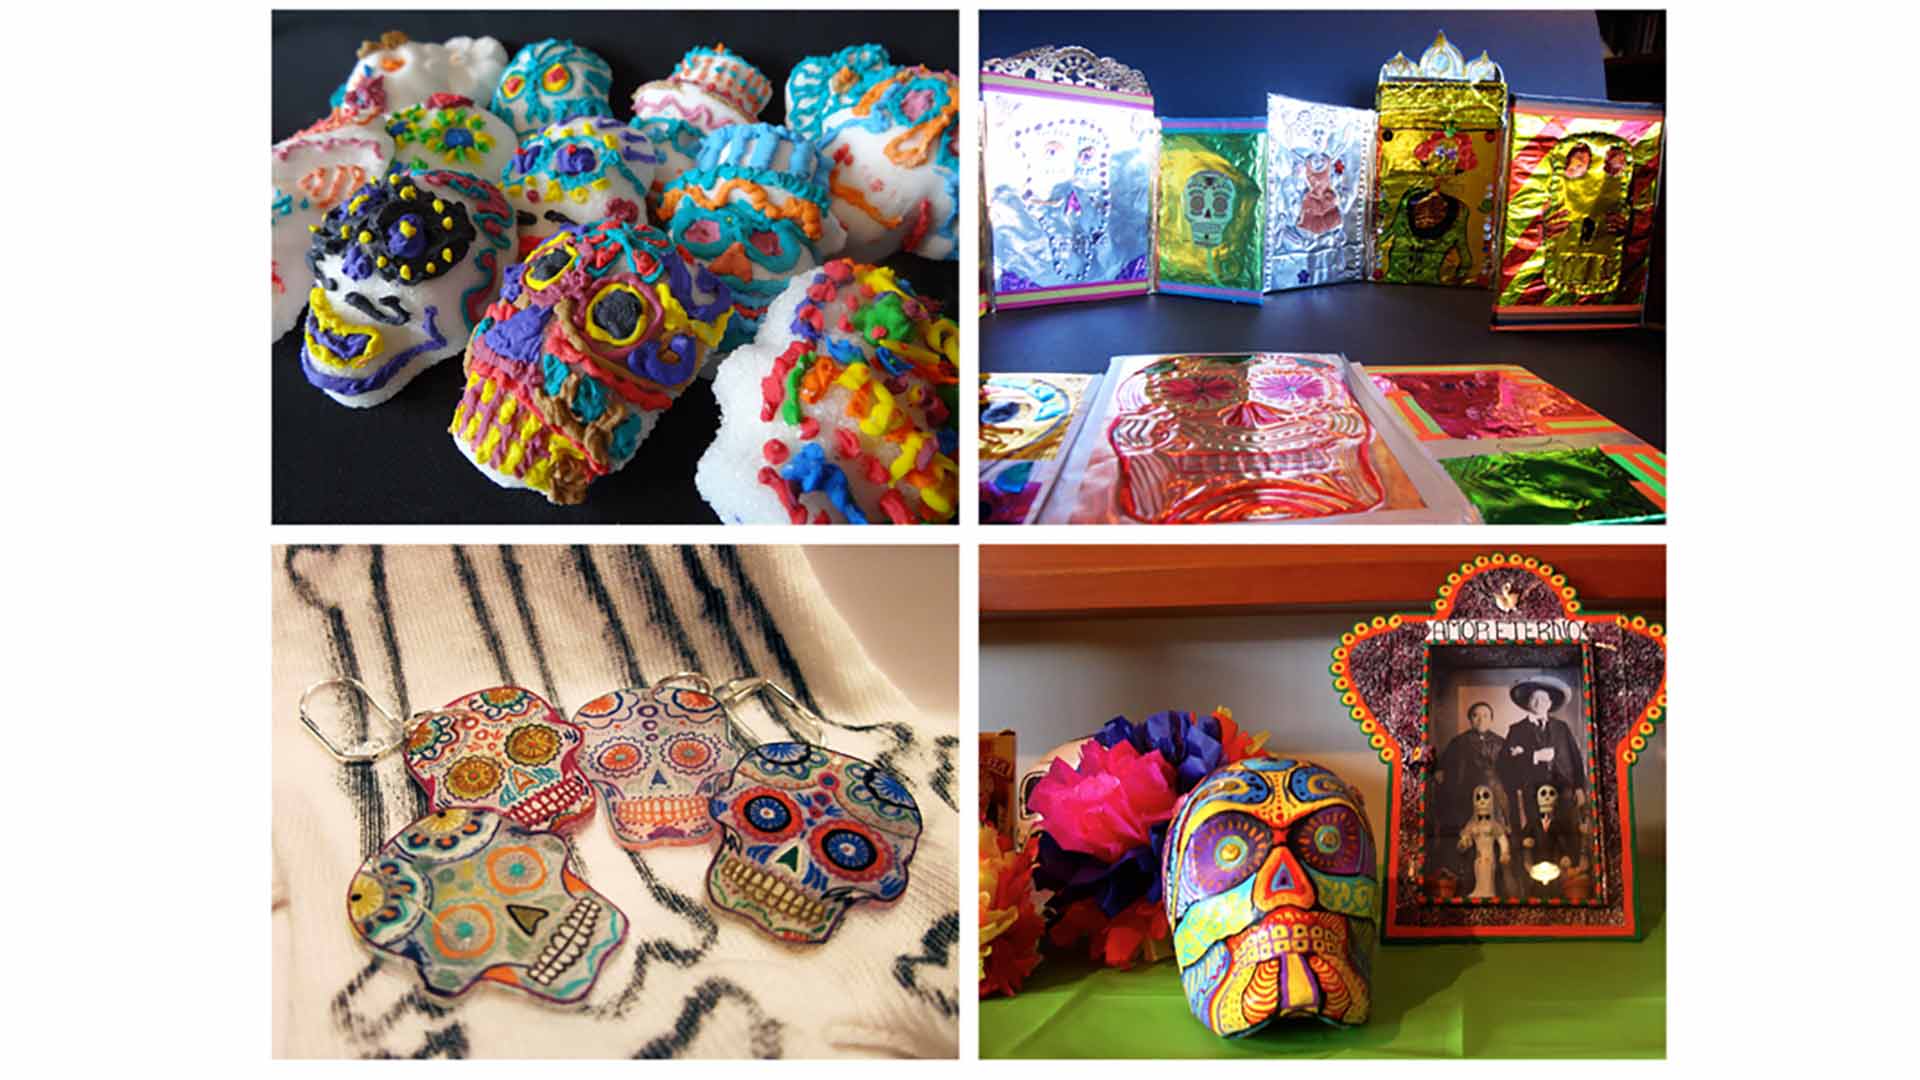 Assortment of Day of the Dead crafts